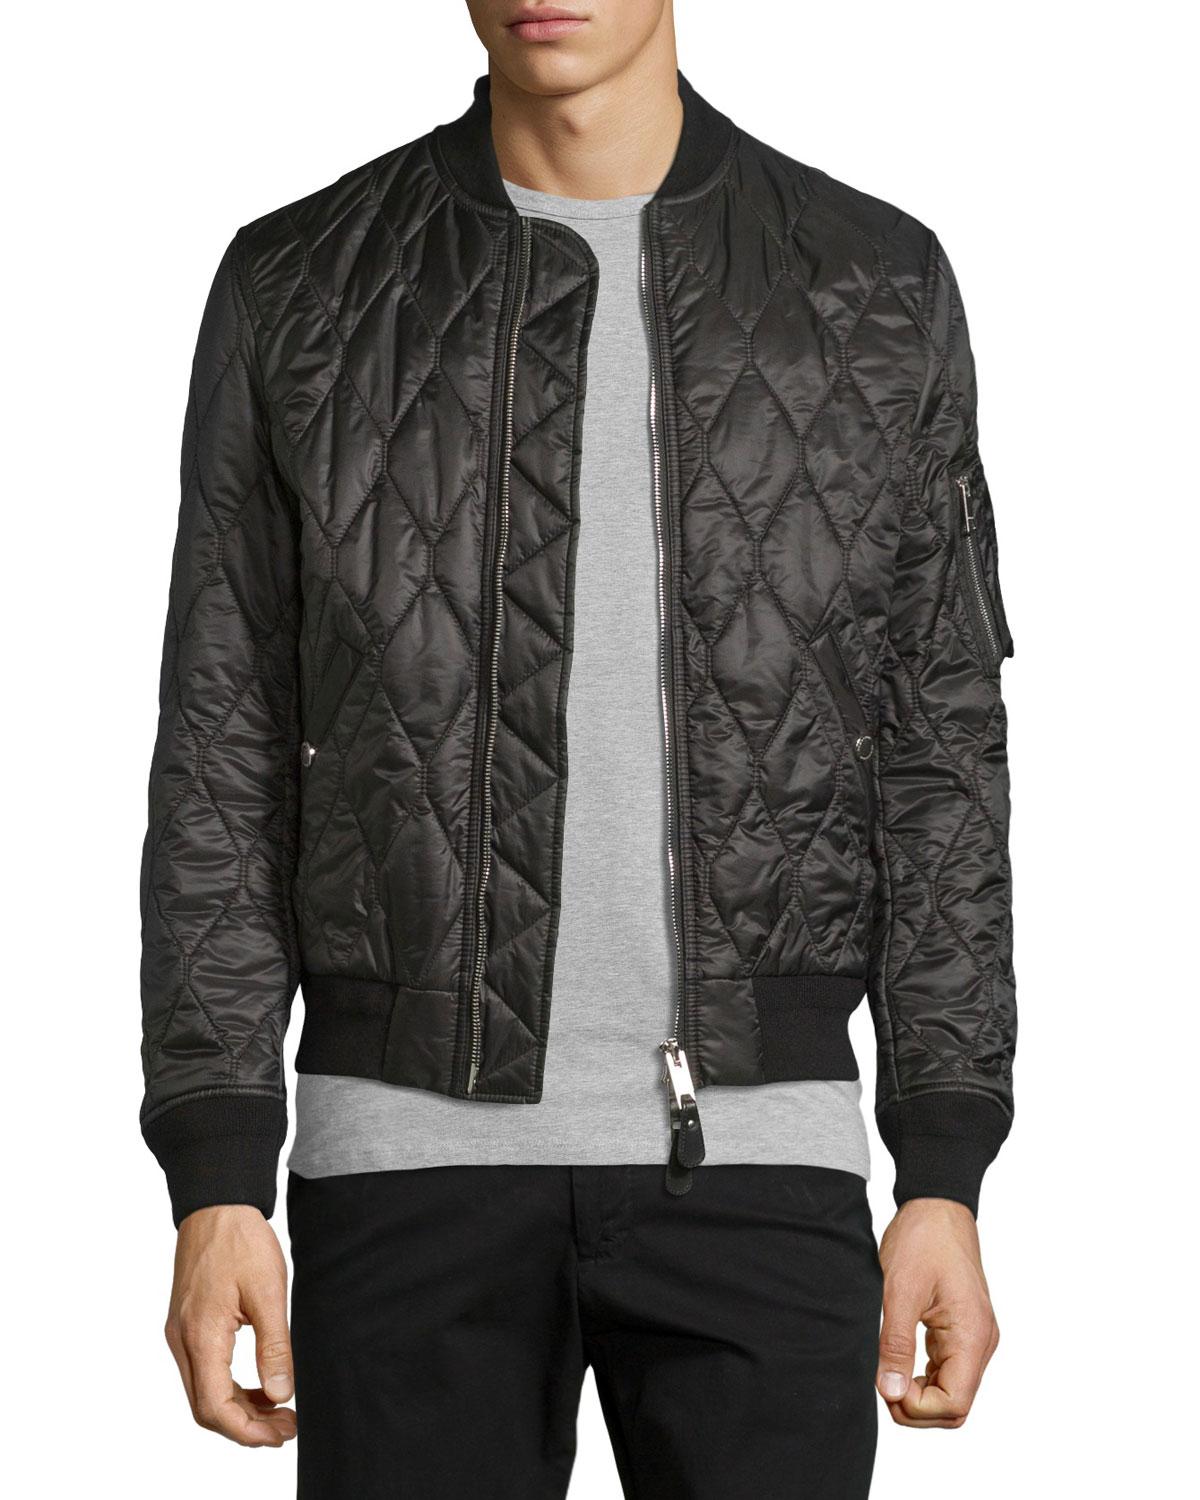 Lyst - Burberry Grandy Lightweight Quilted Bomber Jacket in Black for Men